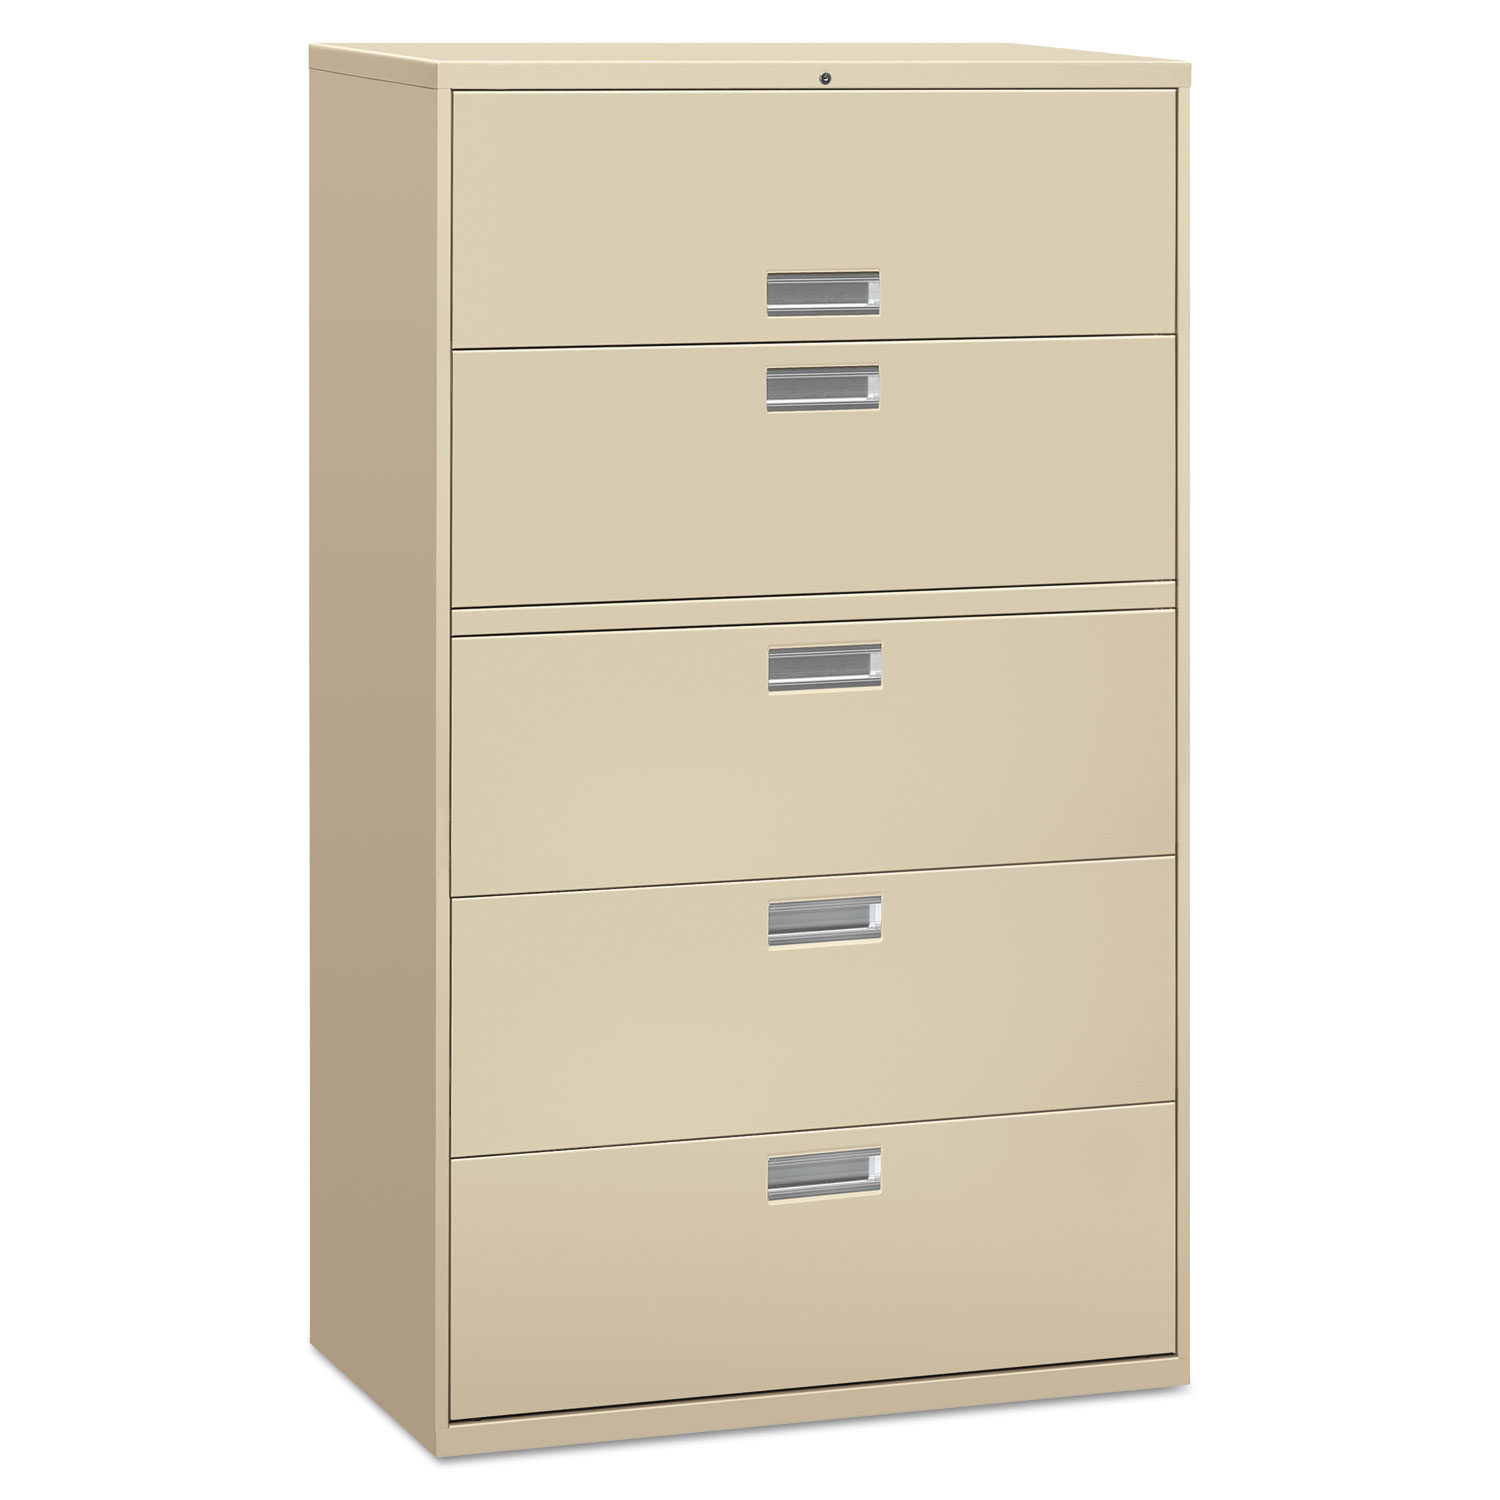 Alera Five-drawer Lateral File Cabinet, 42w X 18d X 64.25h, Charcoal - image 2 of 2